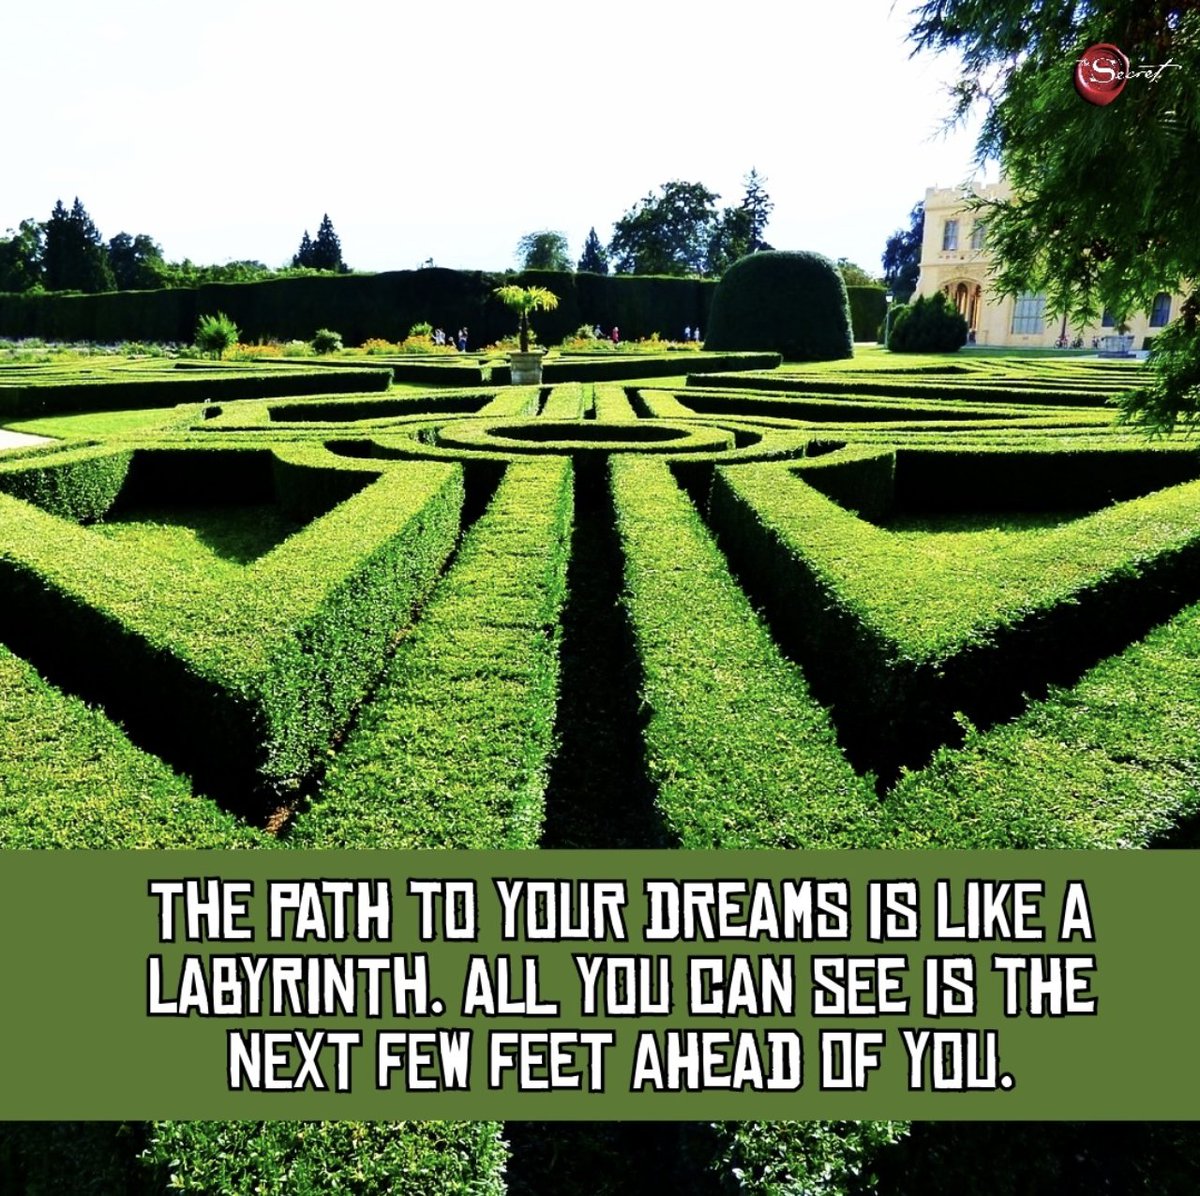 The path to your dreams is like a labyrinth. All you can see is the next few feet ahead of you.